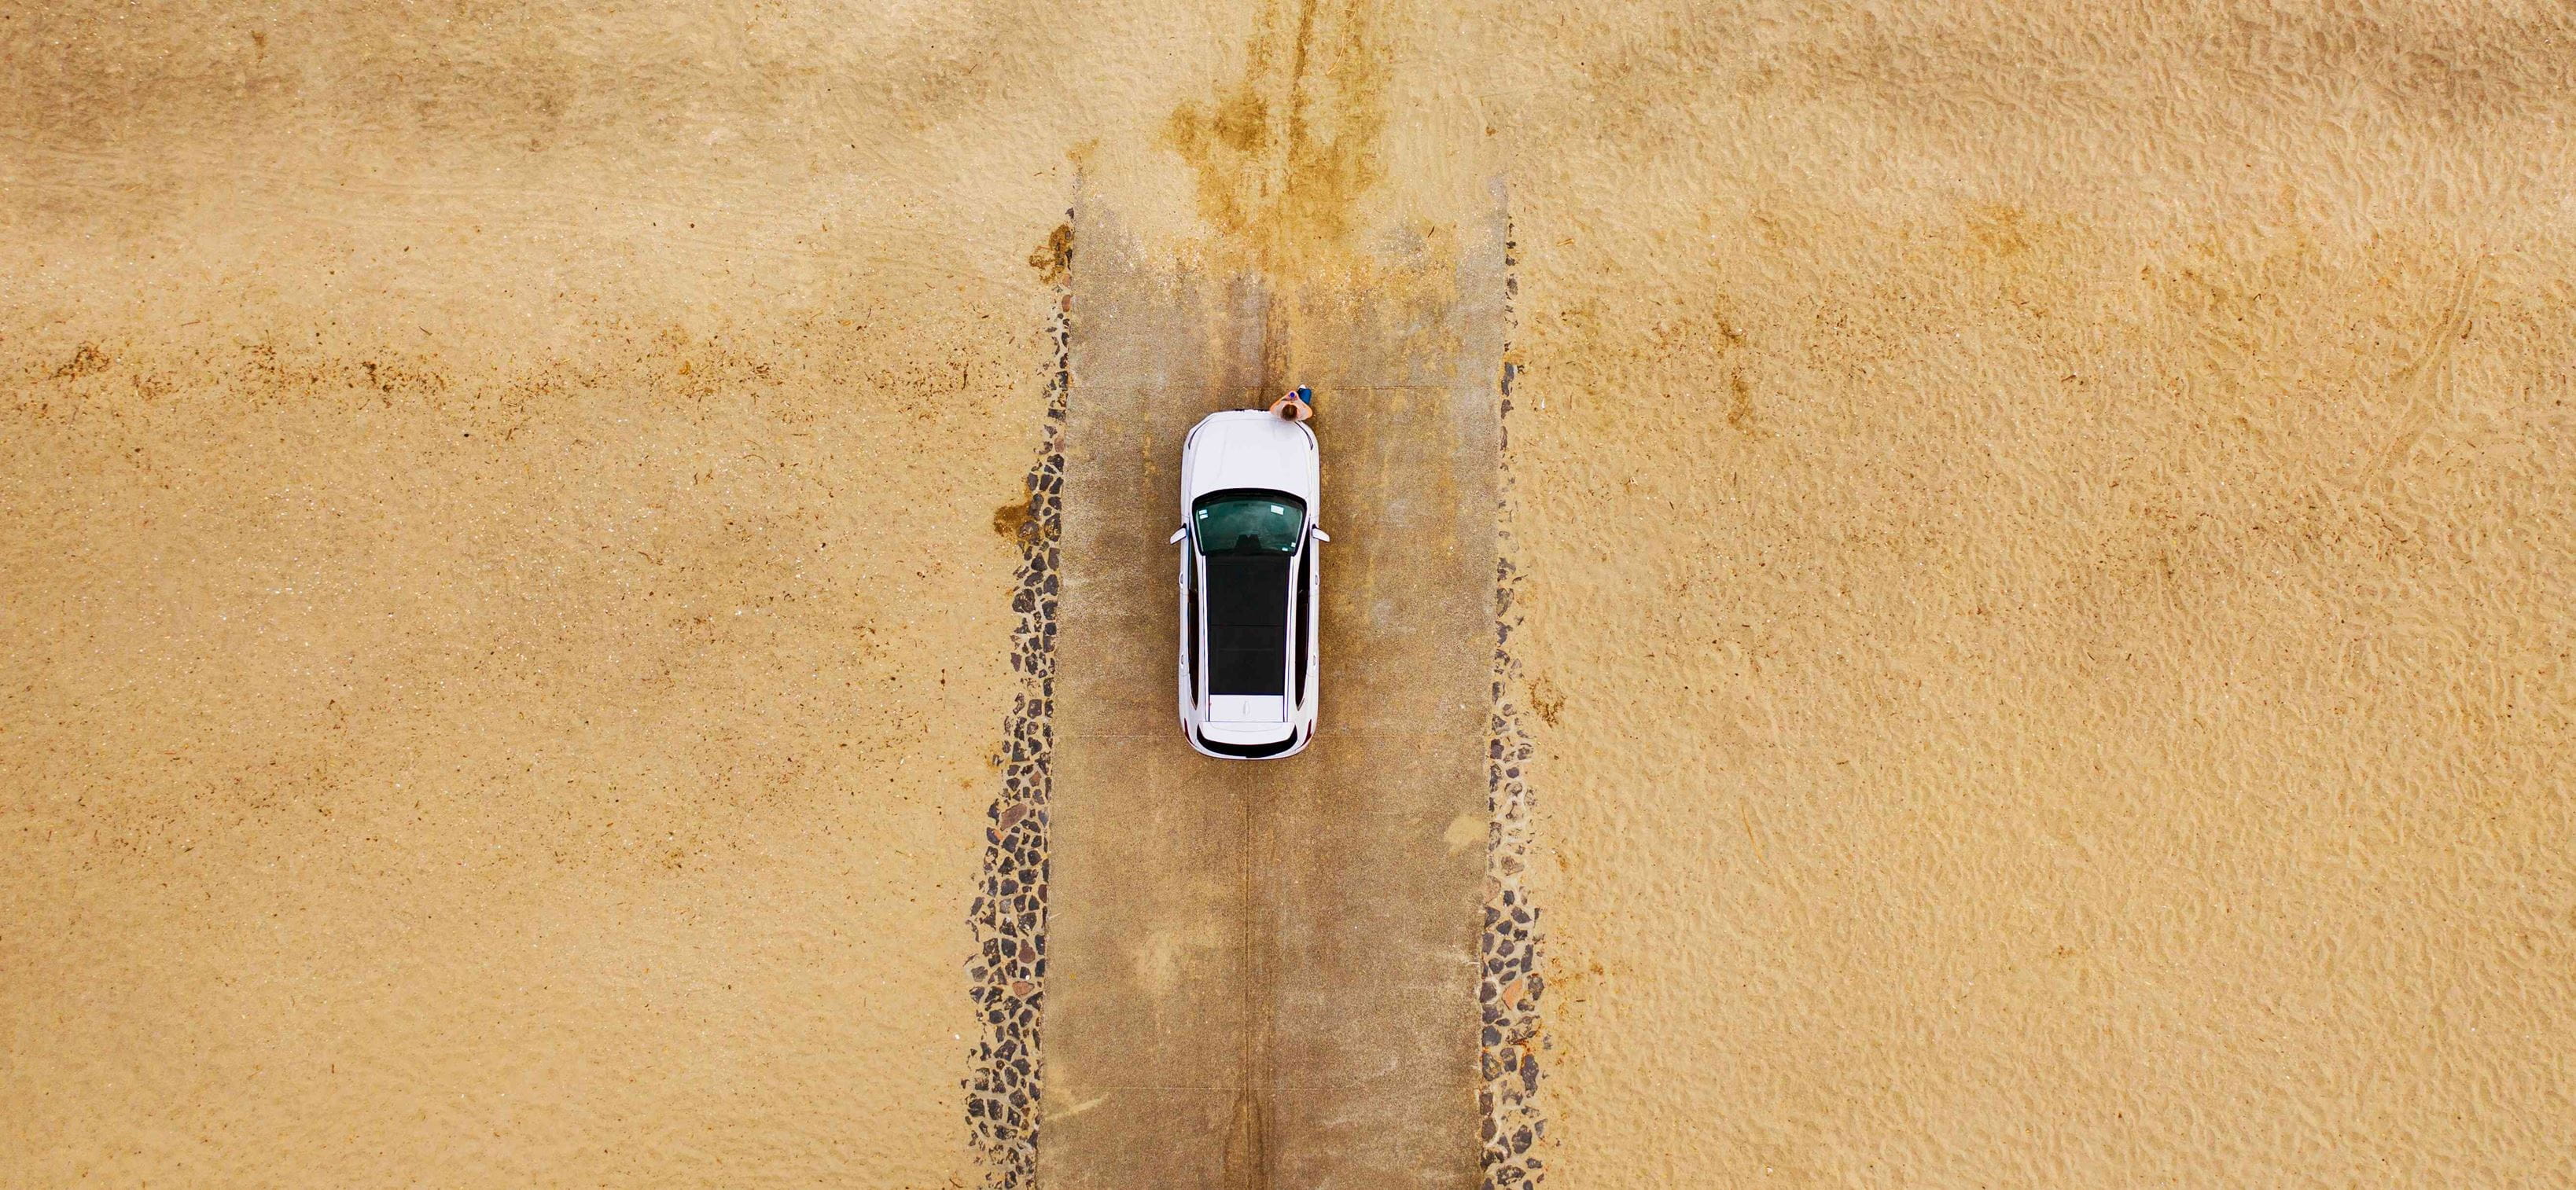 Aerial shot of a white car parked on the sand